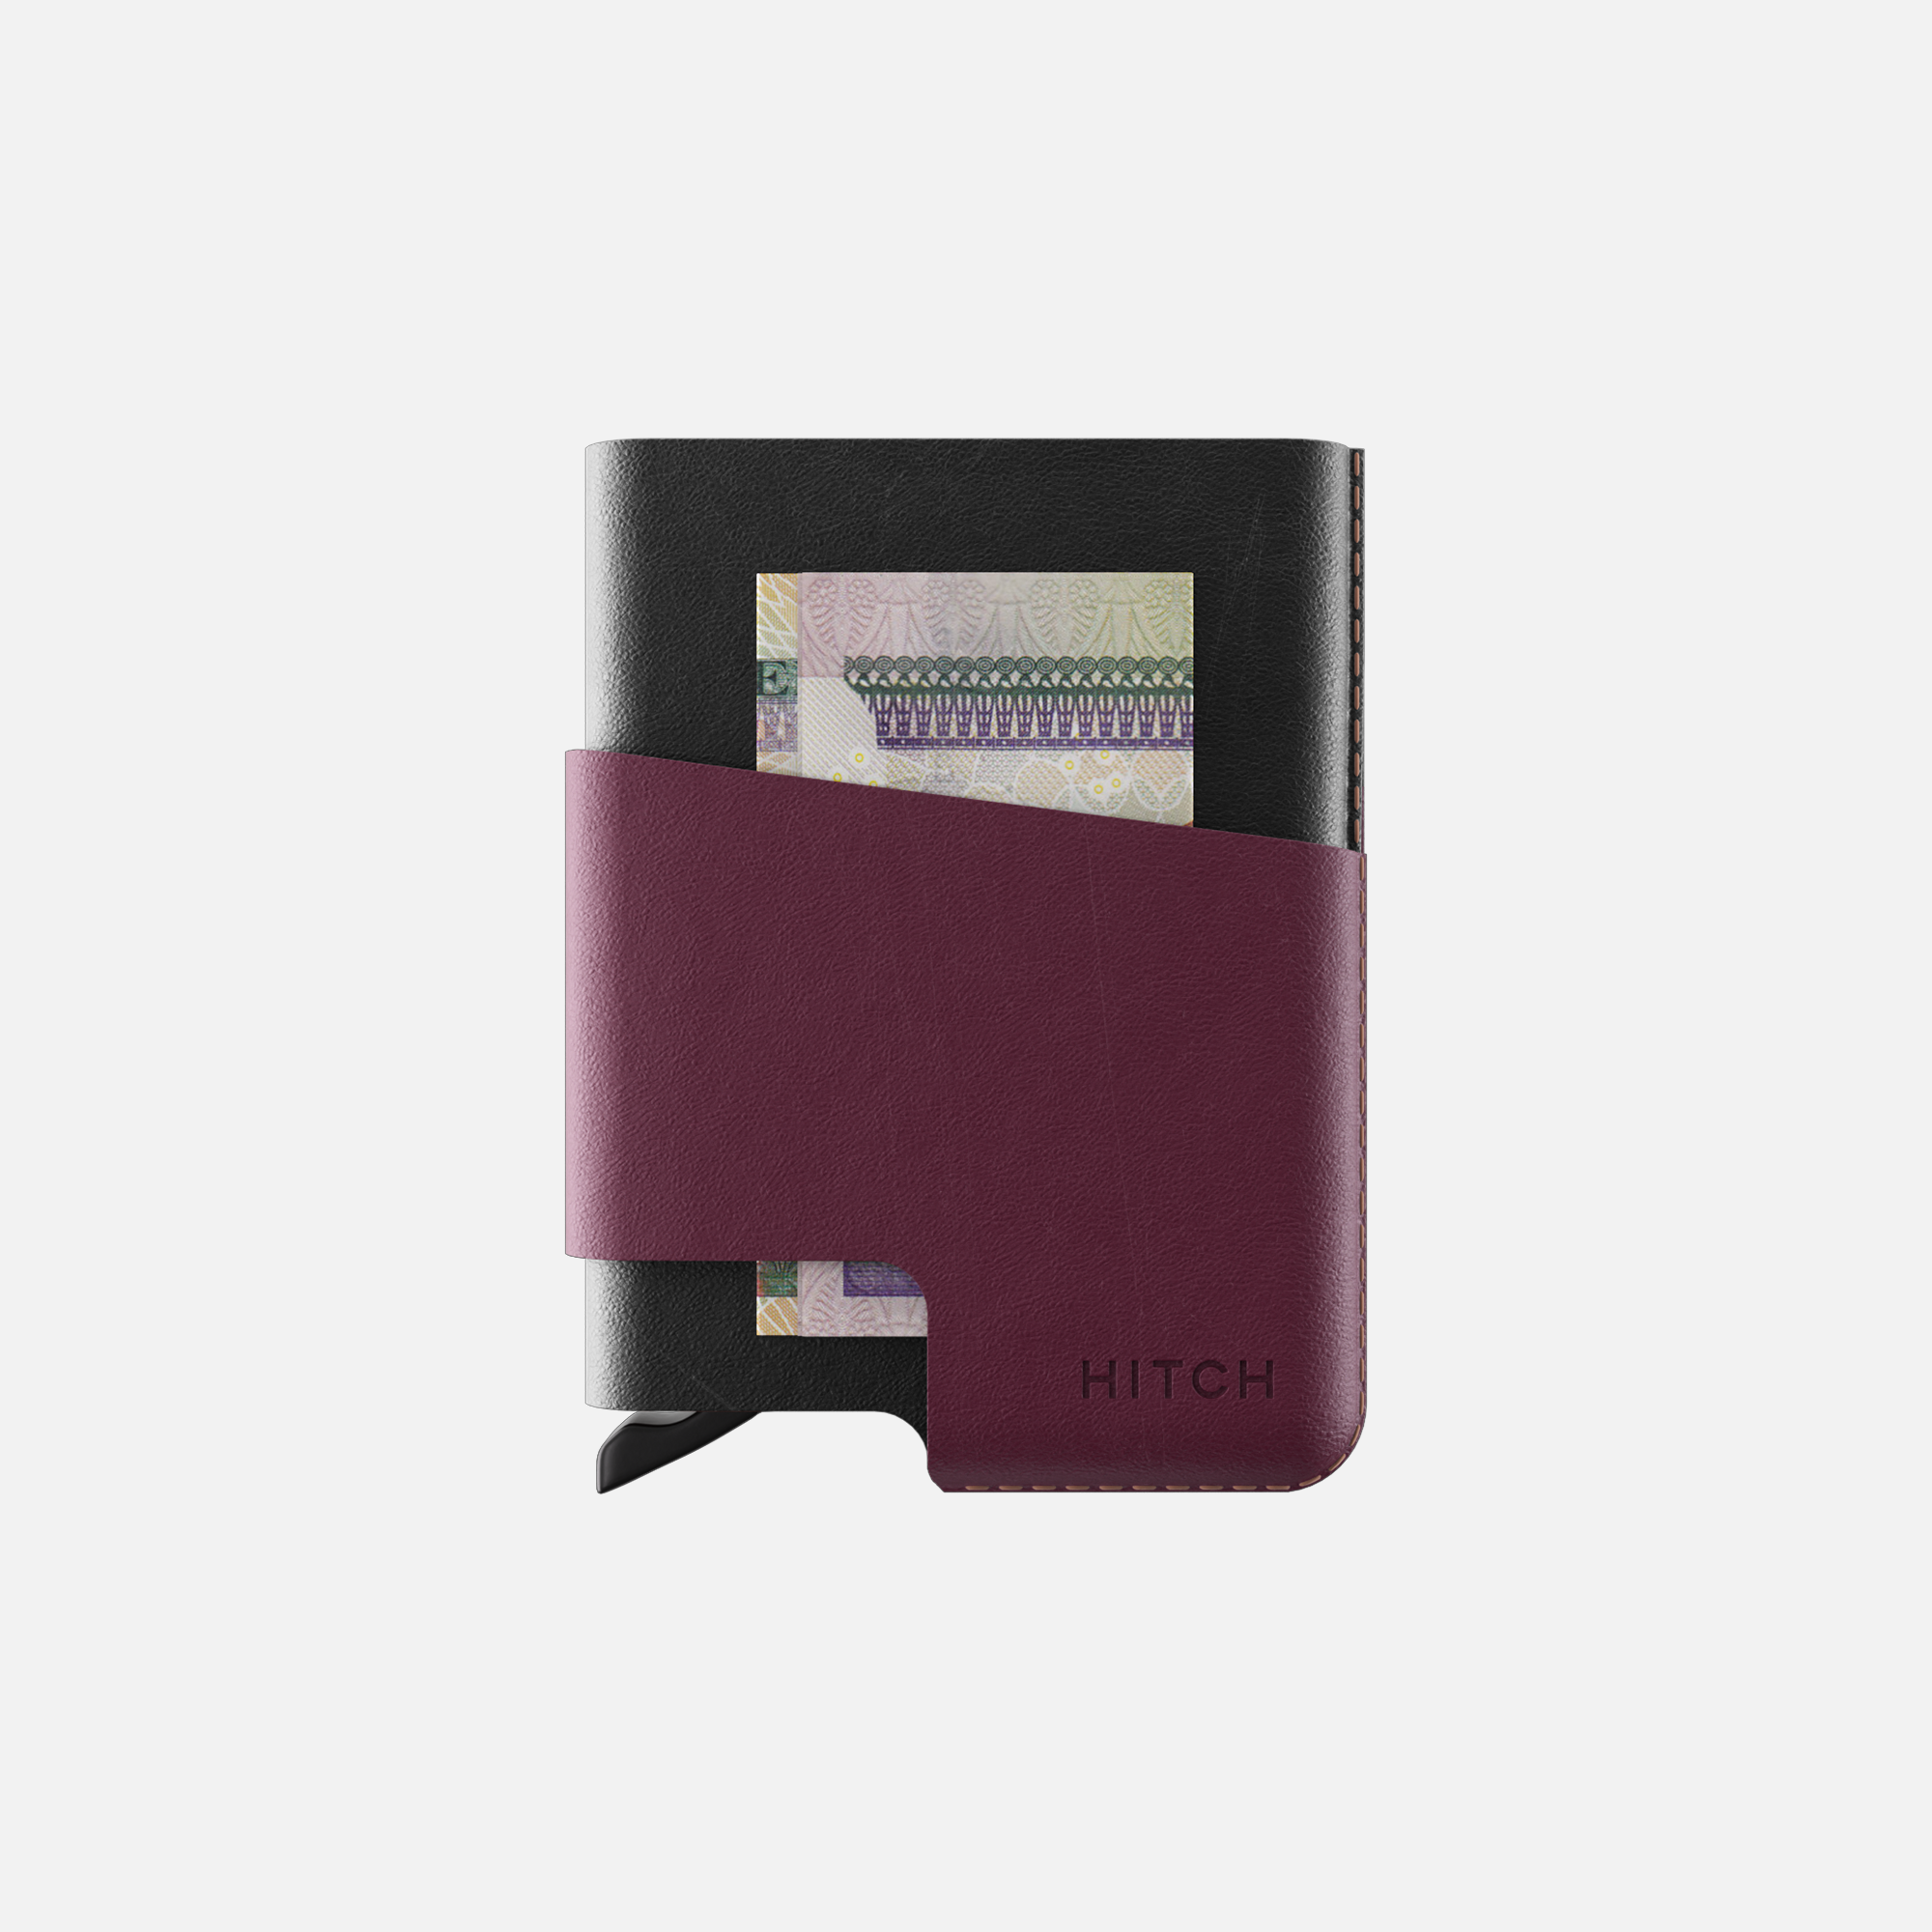 Black and burgundy wallet with money sticking out on a white background